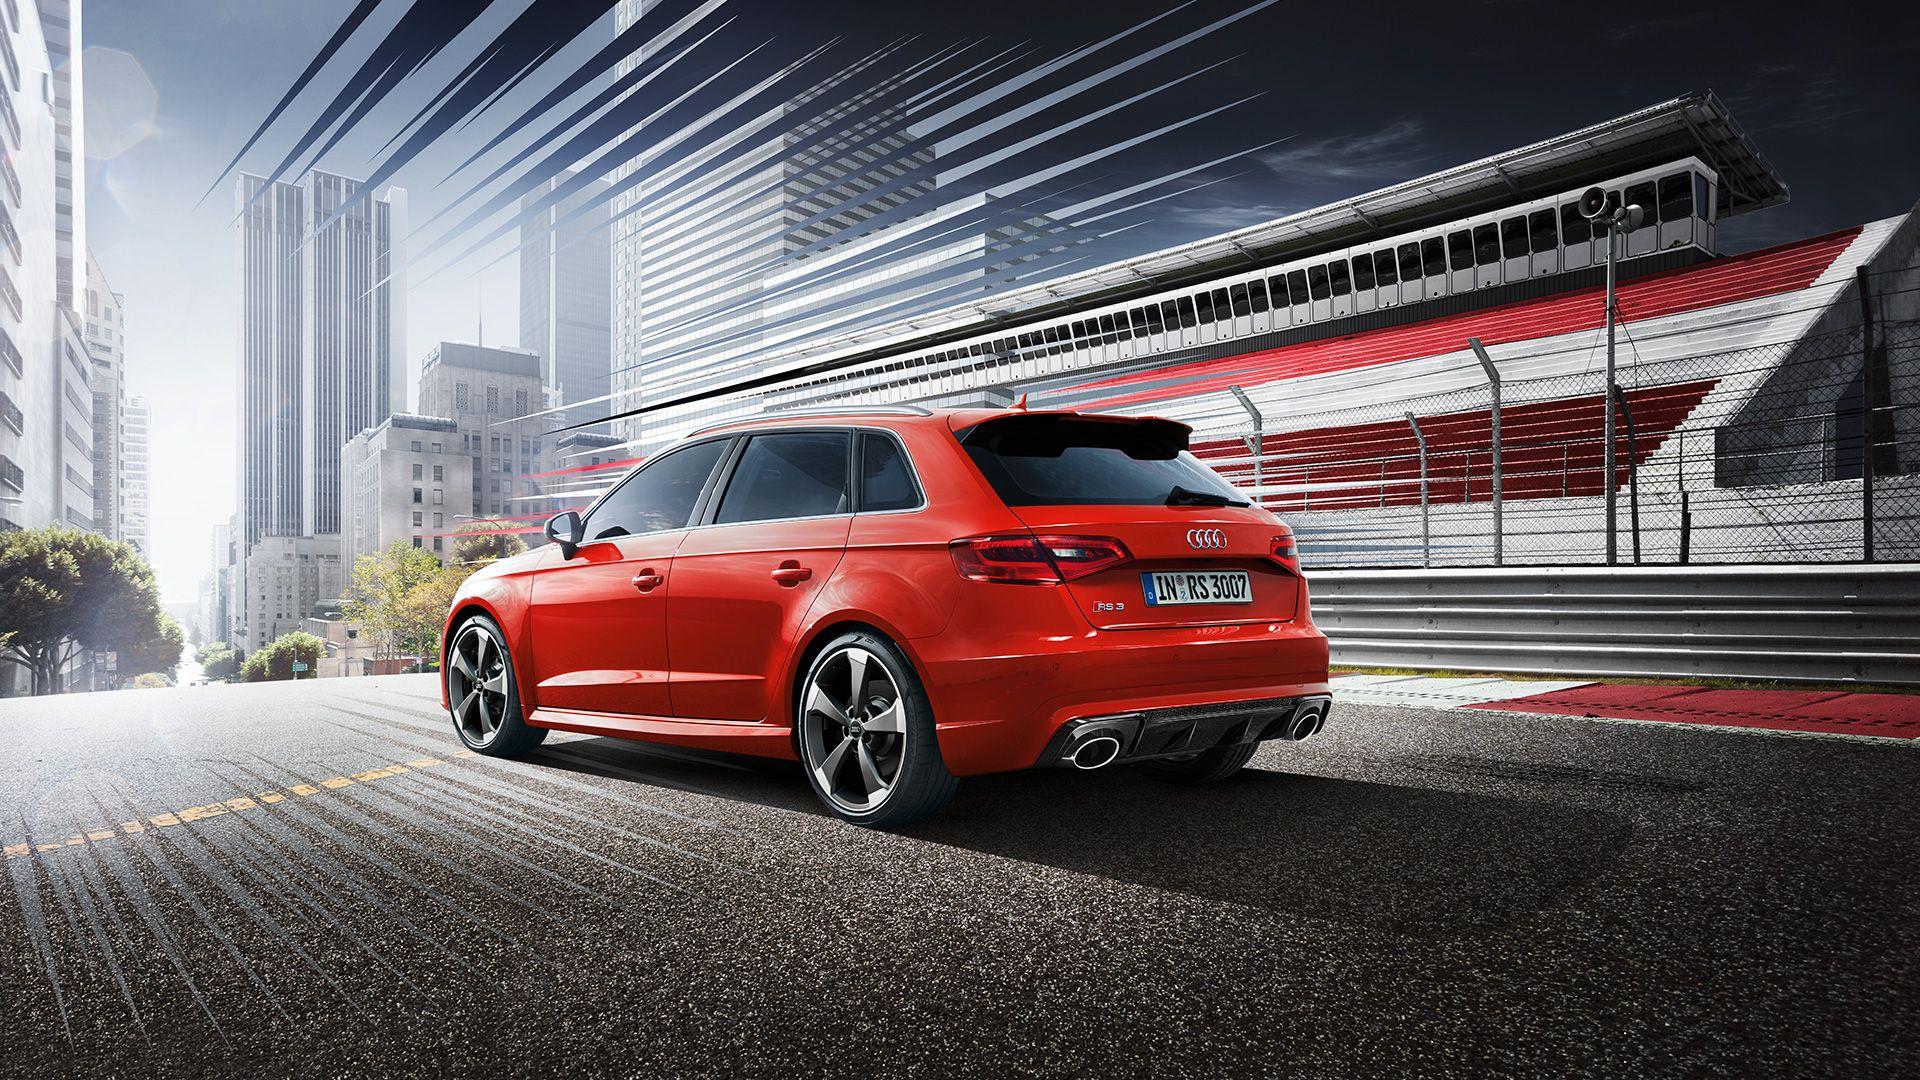 Audi Rs3 Wallpaper, Free 22 Audi Rs3 Mobile Collection